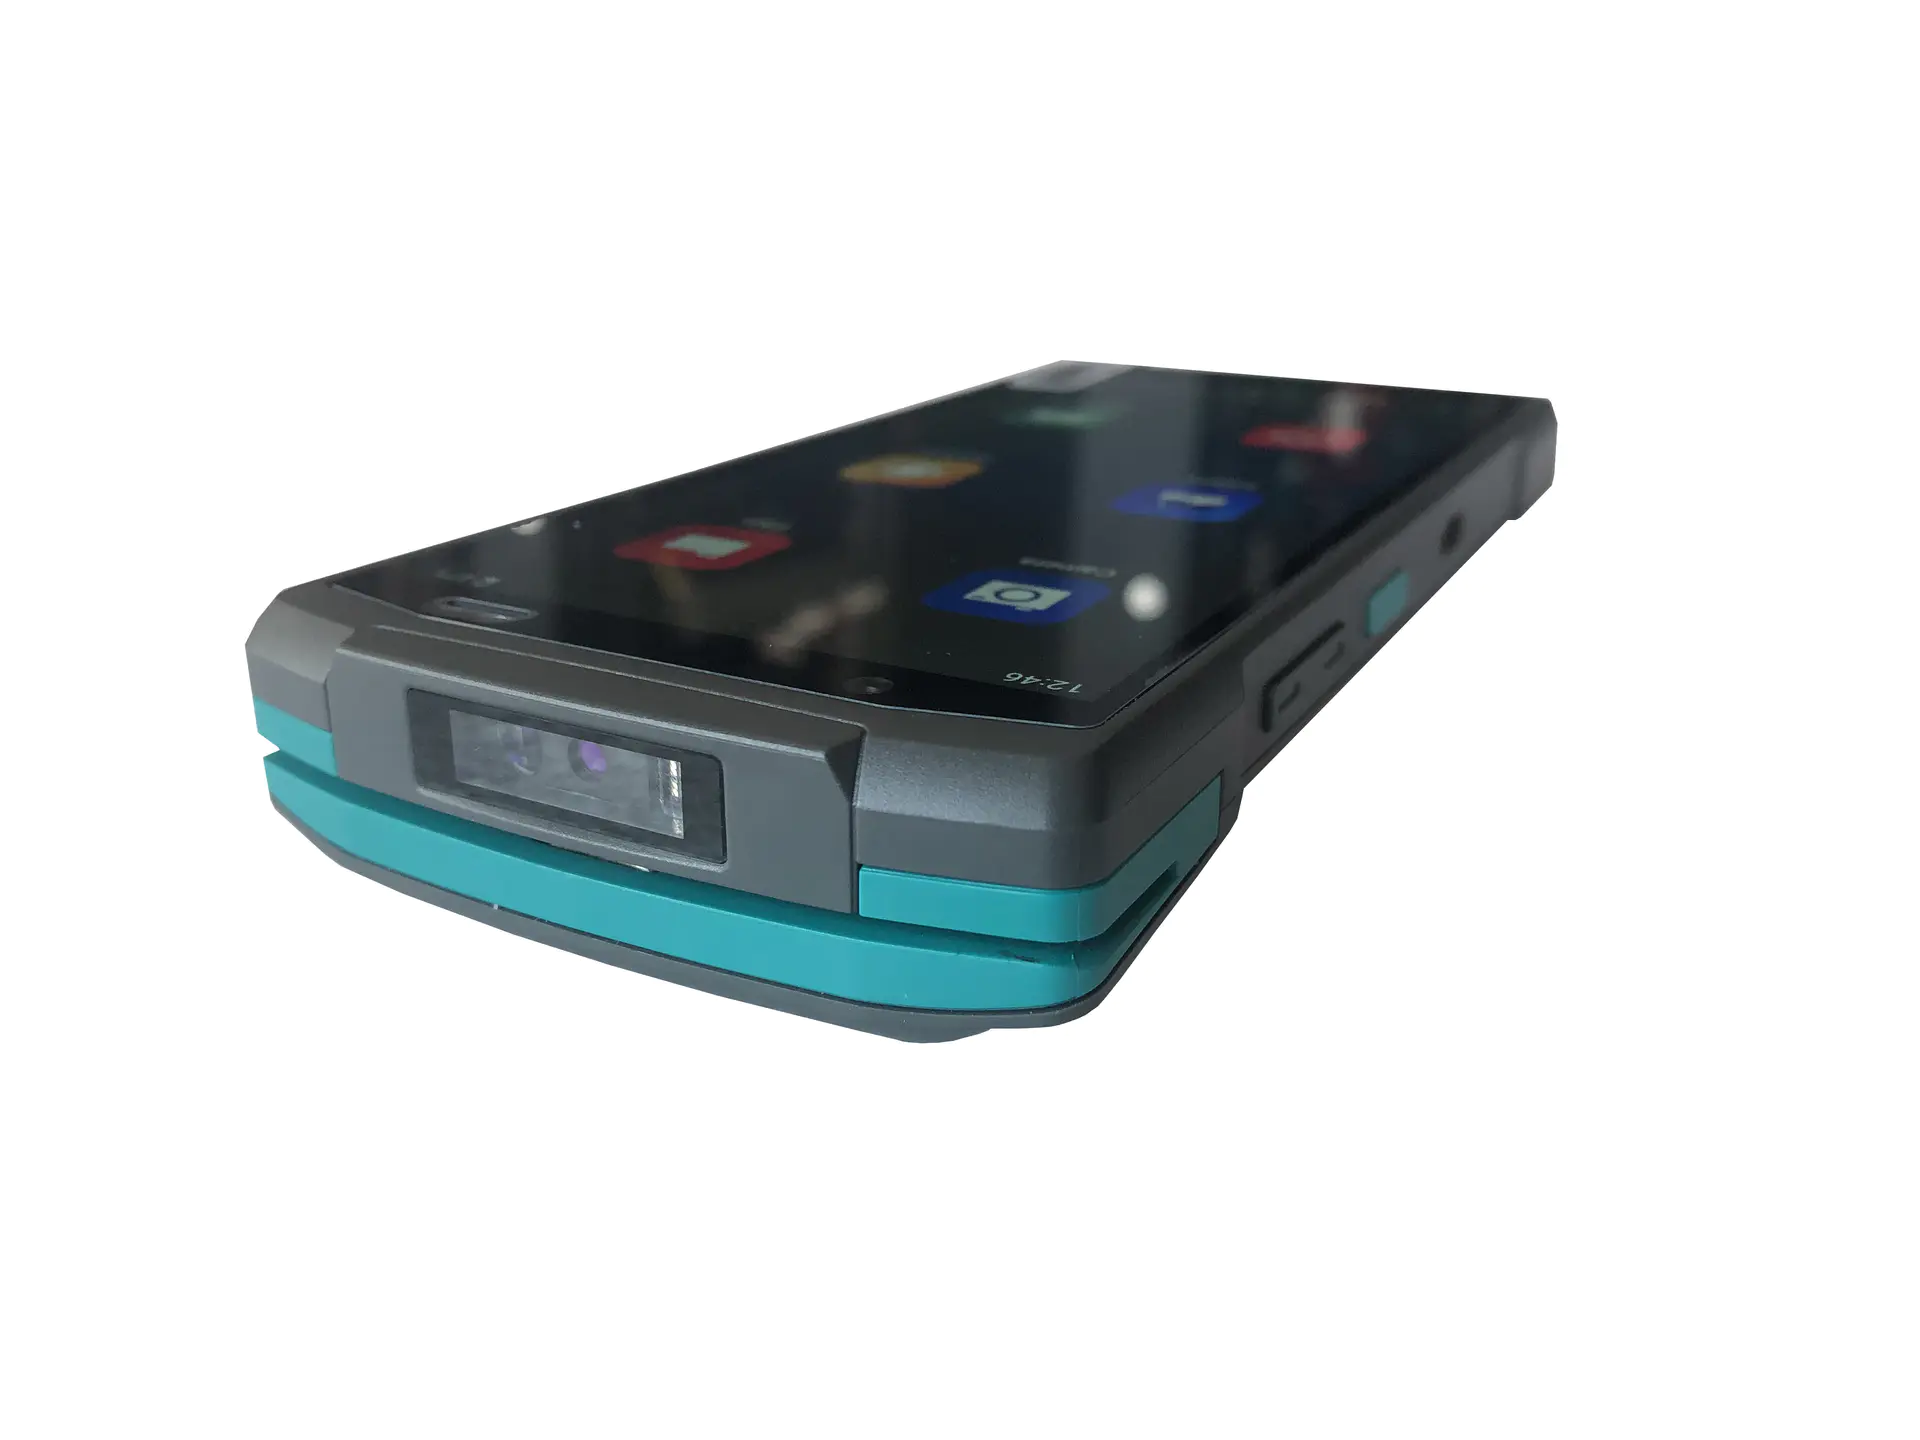 Mobile Android NFC RFID Smart Payment POS terminal